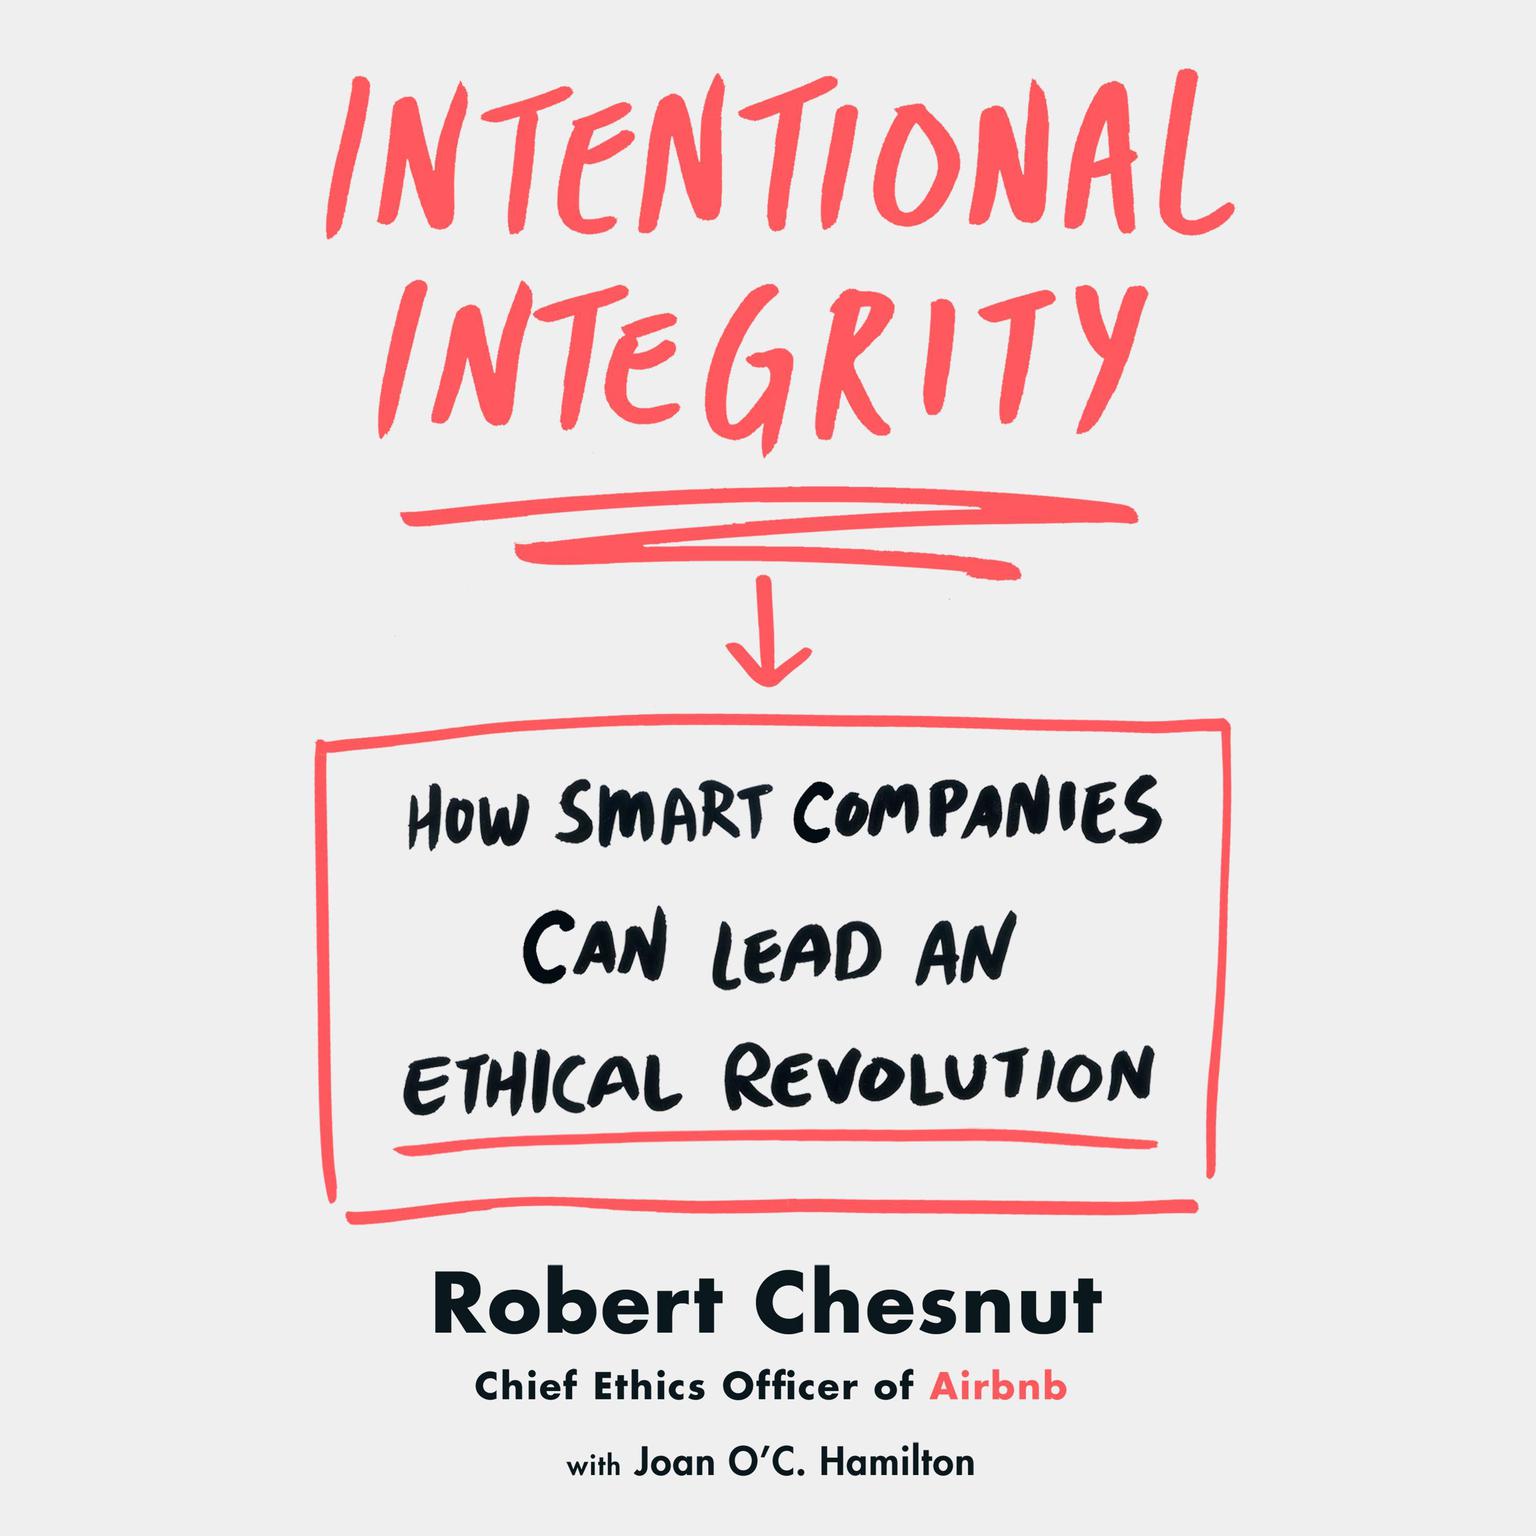 Intentional Integrity: How Smart Companies Can Lead an Ethical Revolution Audiobook, by Robert Chesnut